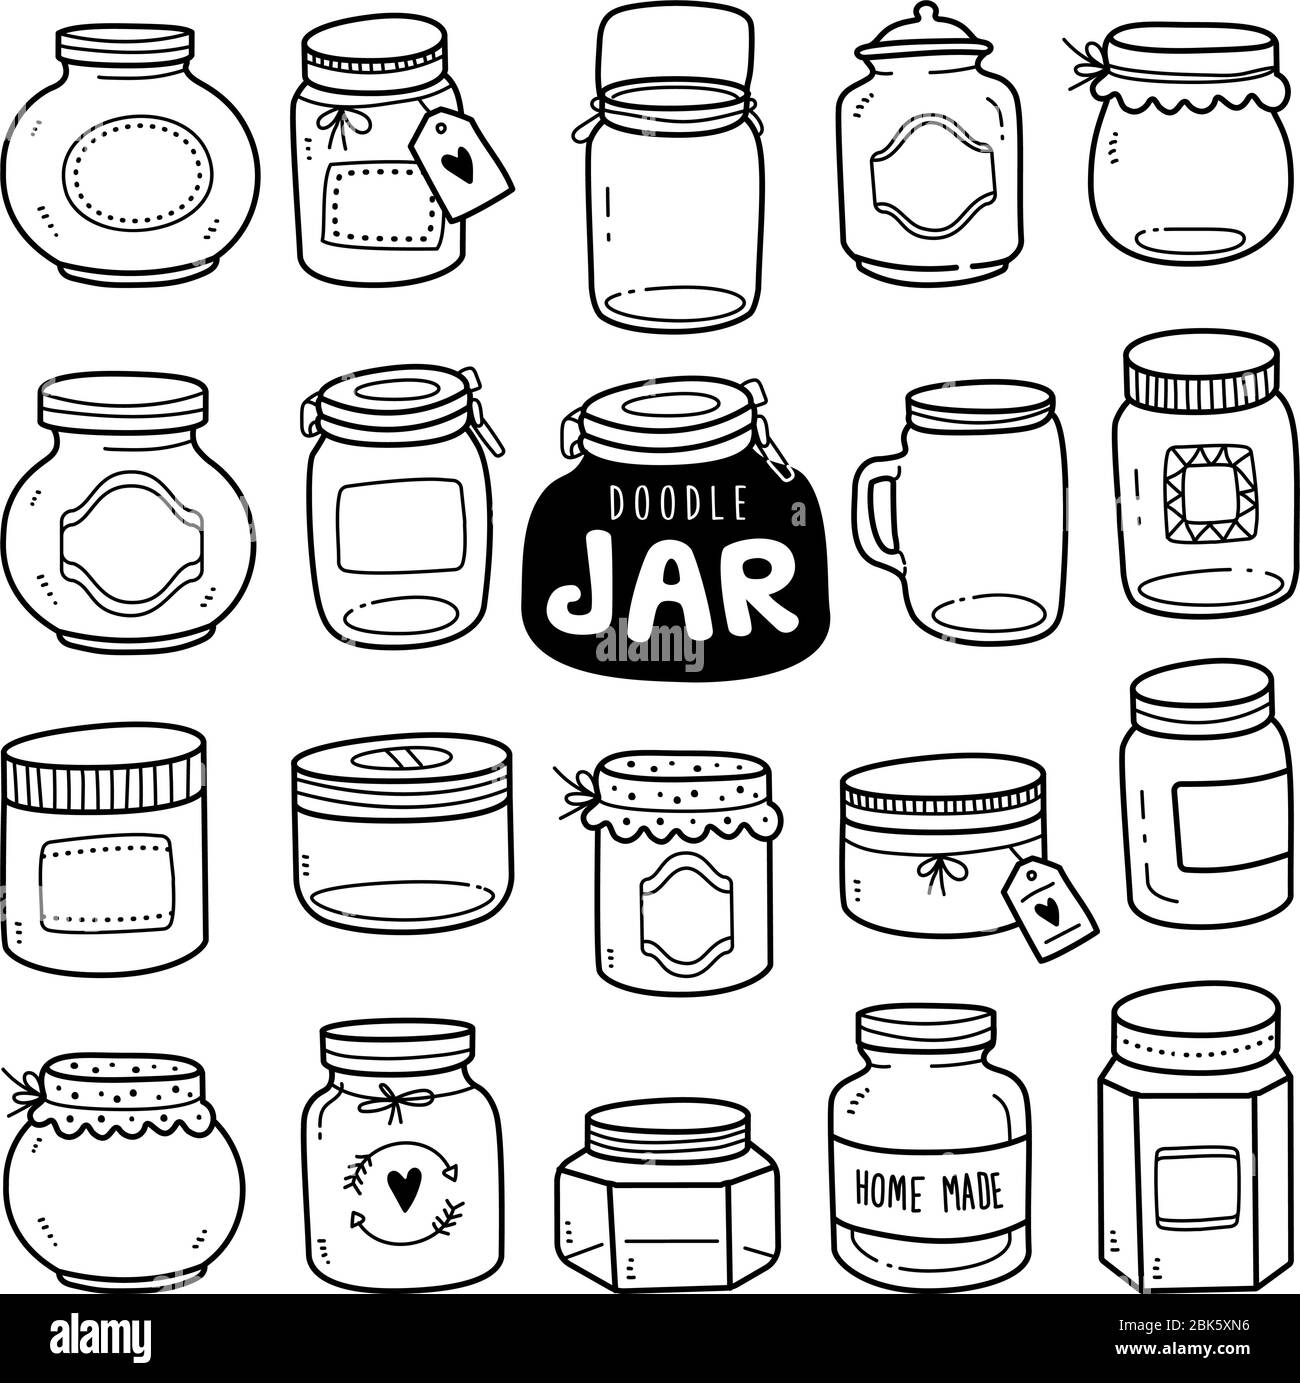 Set of vector doodle element related to jars. Set of hand-drawn empty jars isolated over white background. Stock Vector